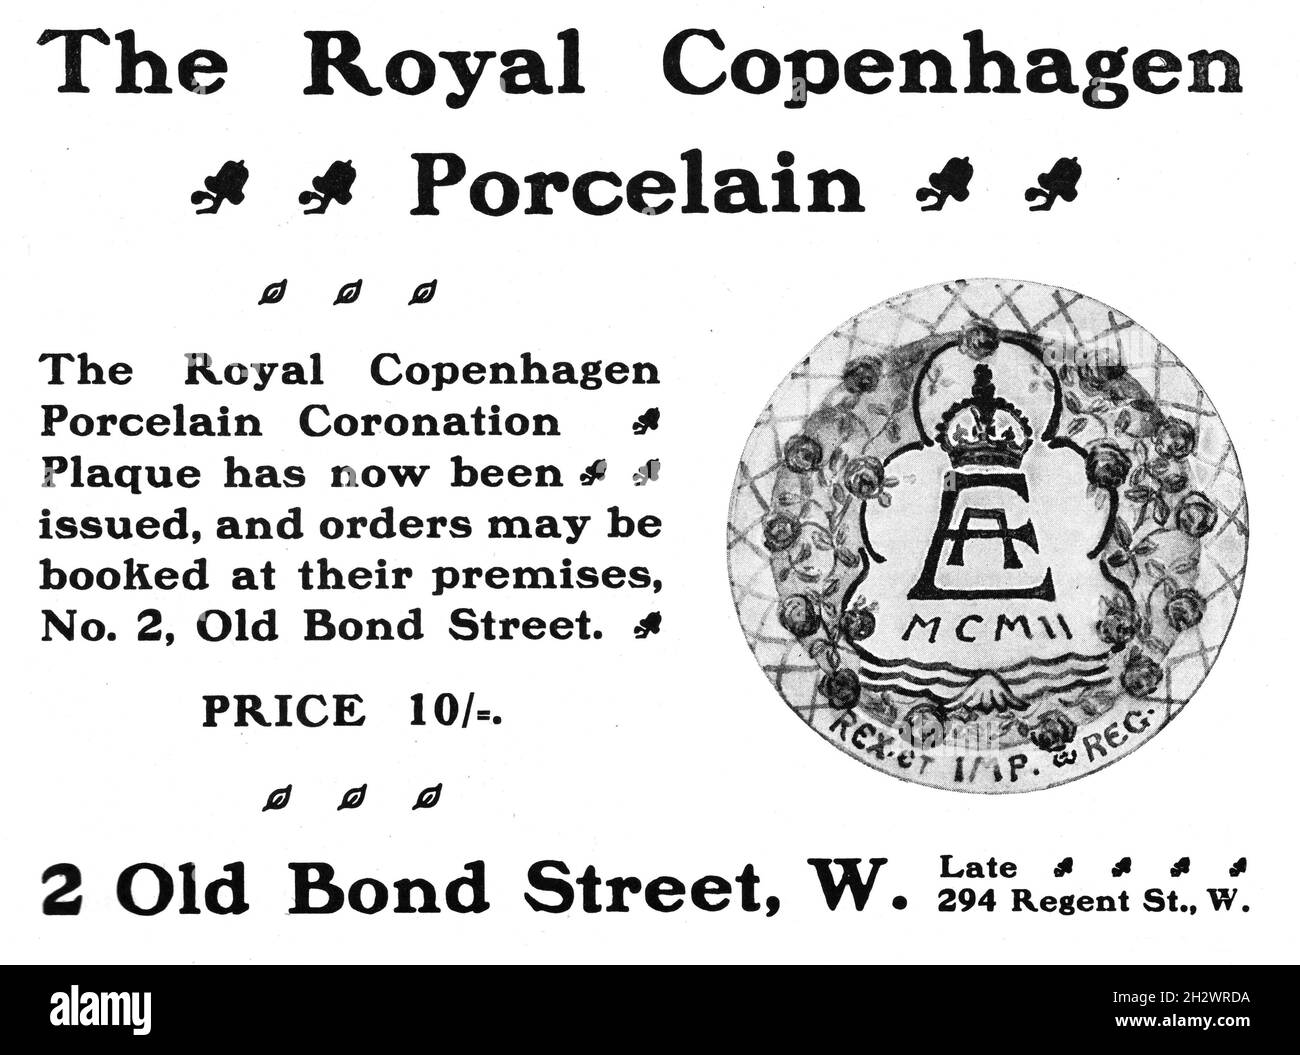 A 1902 advertisement promoting a commemorative King Edward VII Coronation plaque. Manufactured by Royal Copenhagen Porcelain. The company’s London headquarters was located at 2 Old Bond Street. Stock Photo